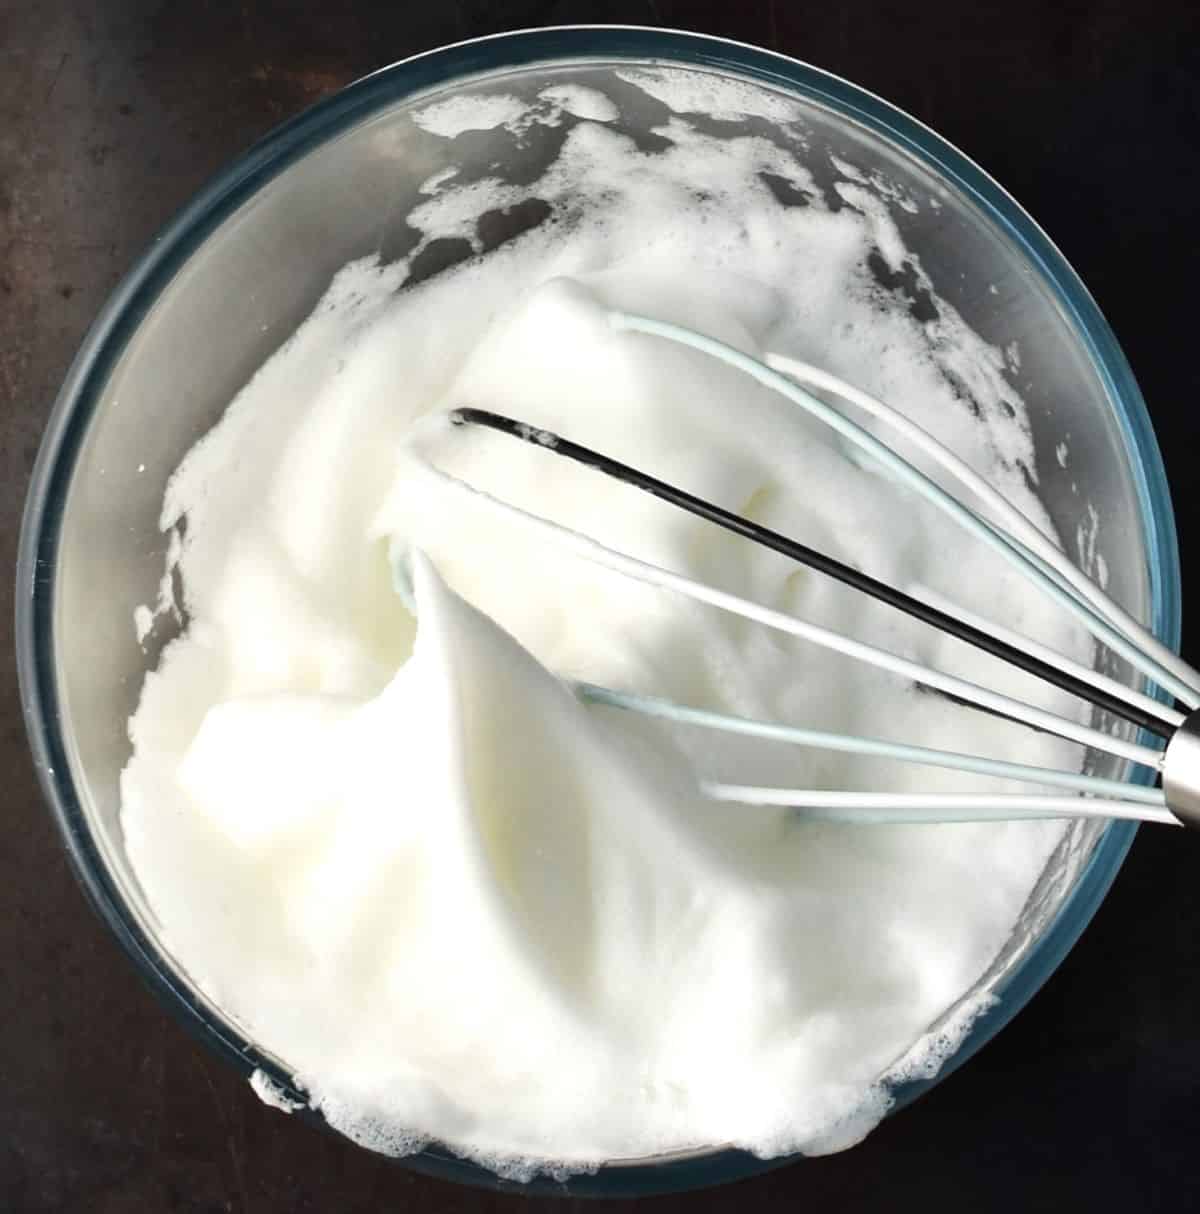 Beaten egg whites in mixing bowl with whisk.